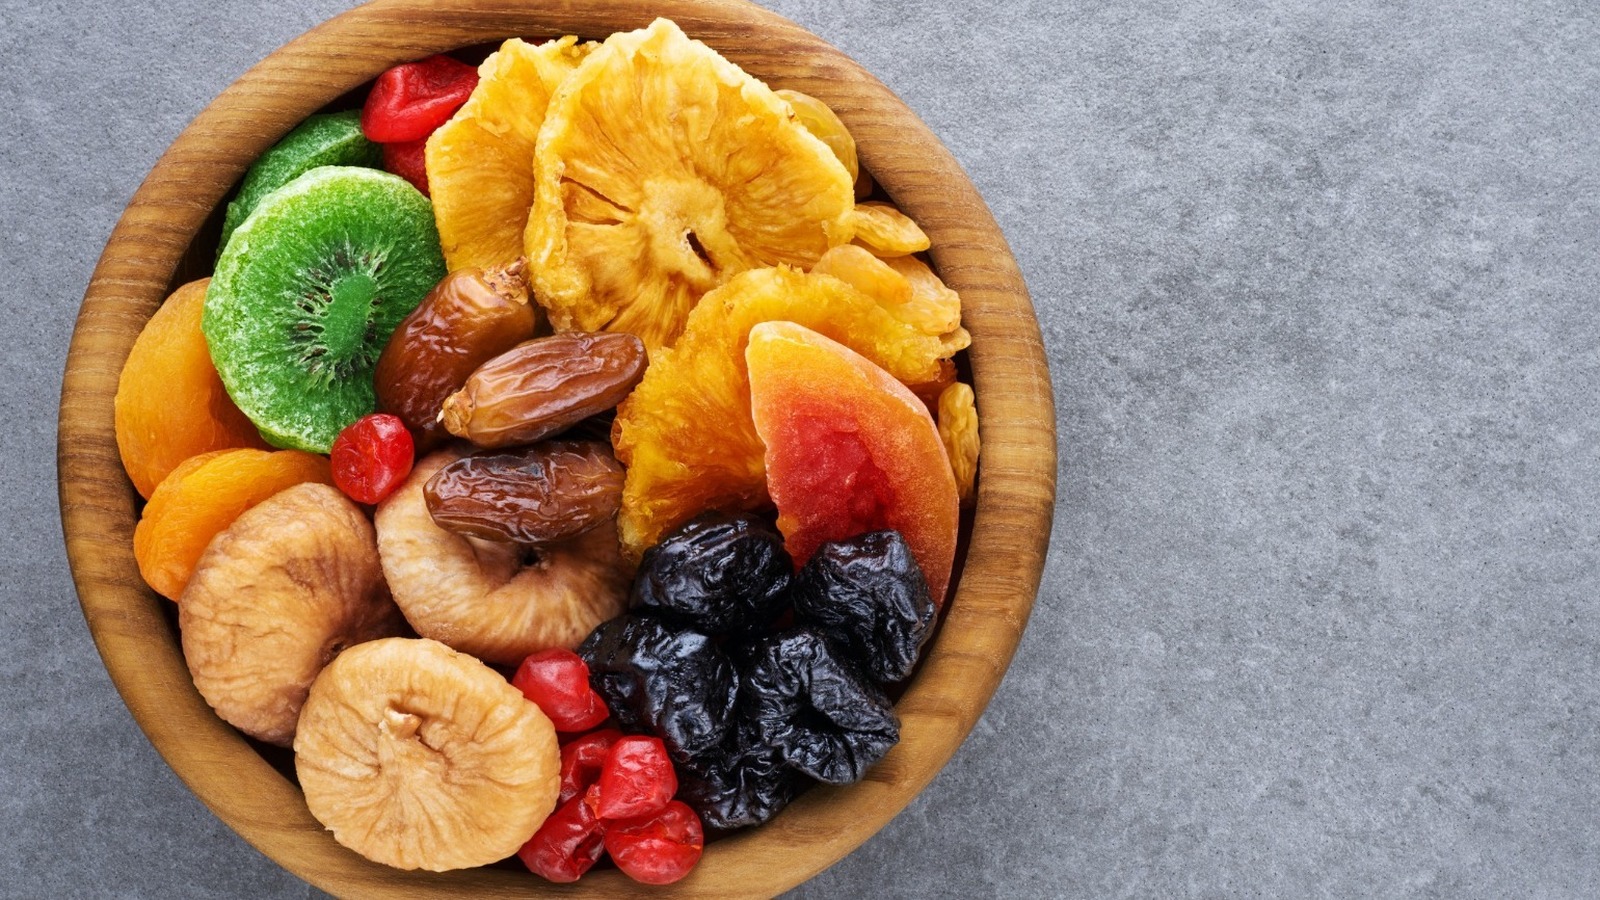 Are certain fruits healthier than others? - Harvard Health